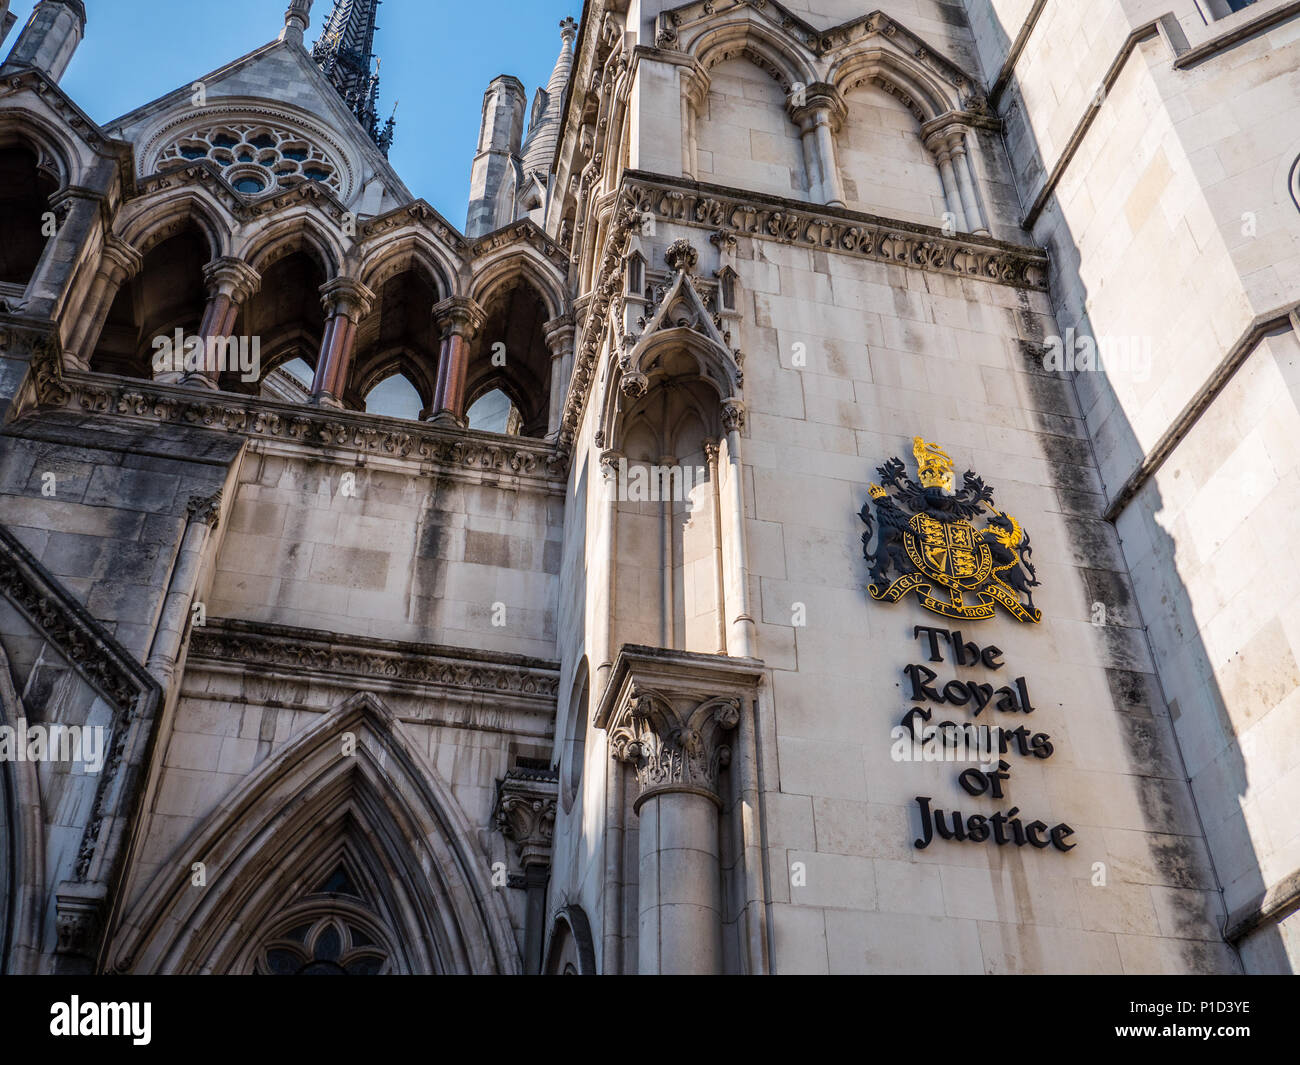 The High Court, Royal Courts Of Justice, London, England, UK, GB. Stock Photo